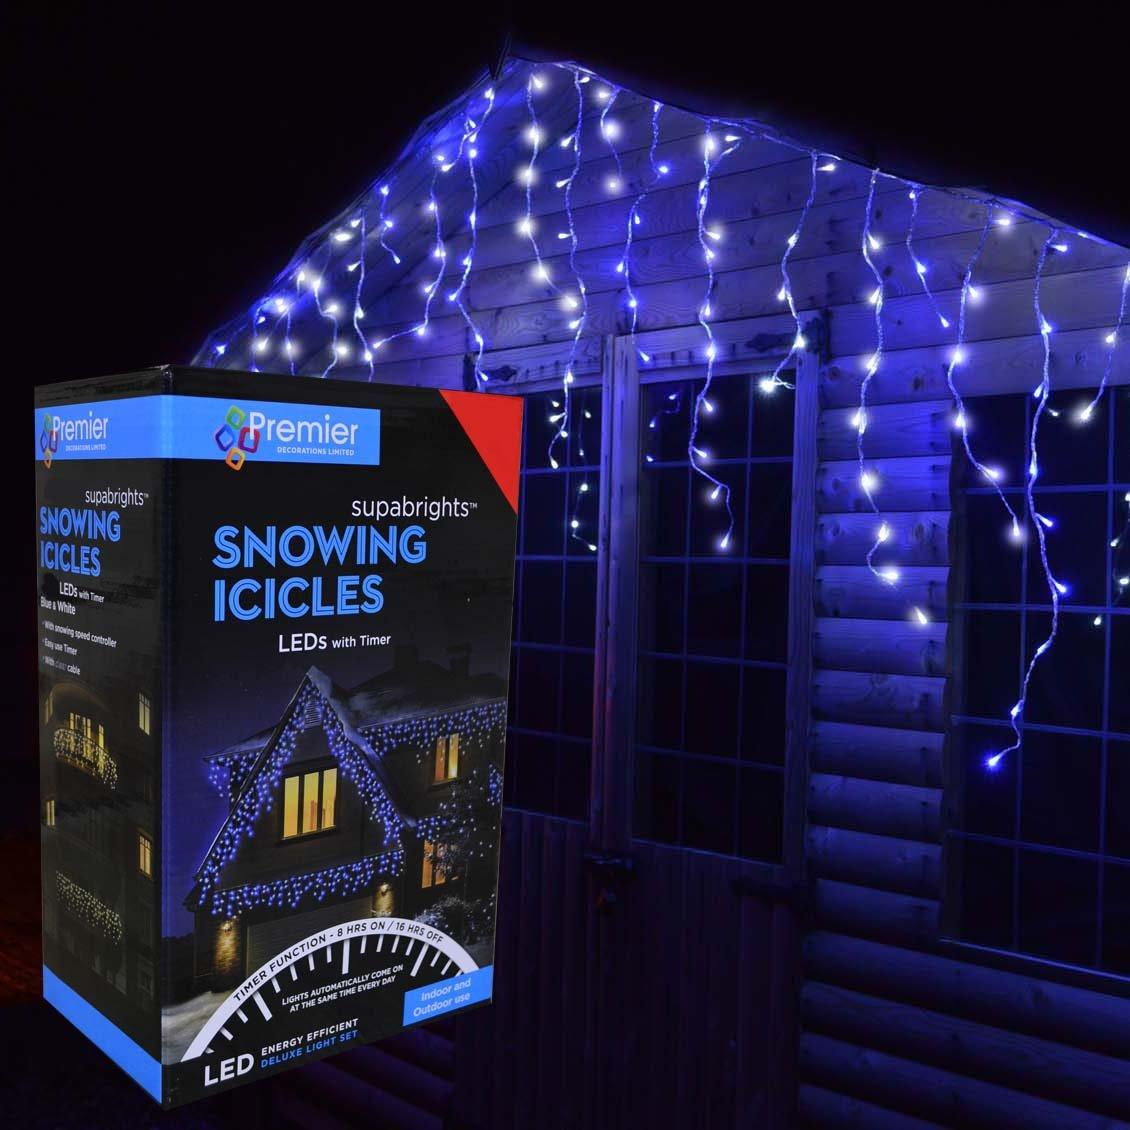 960 LED 23.8m Premier Snowing Iciclebrights Indoor Outdoor Multifunction Christmas Icicle Lights on 